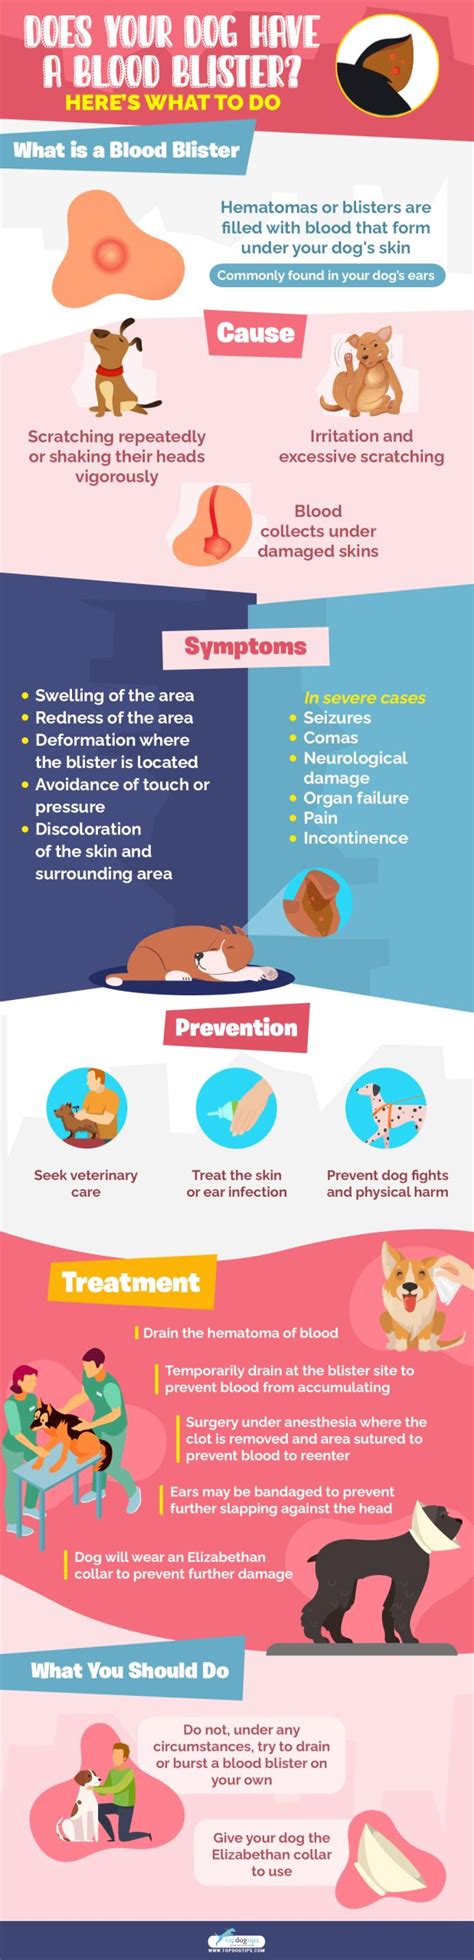 Does Your Dog Have A Blood Blister Heres What To Do Top Dog Tips